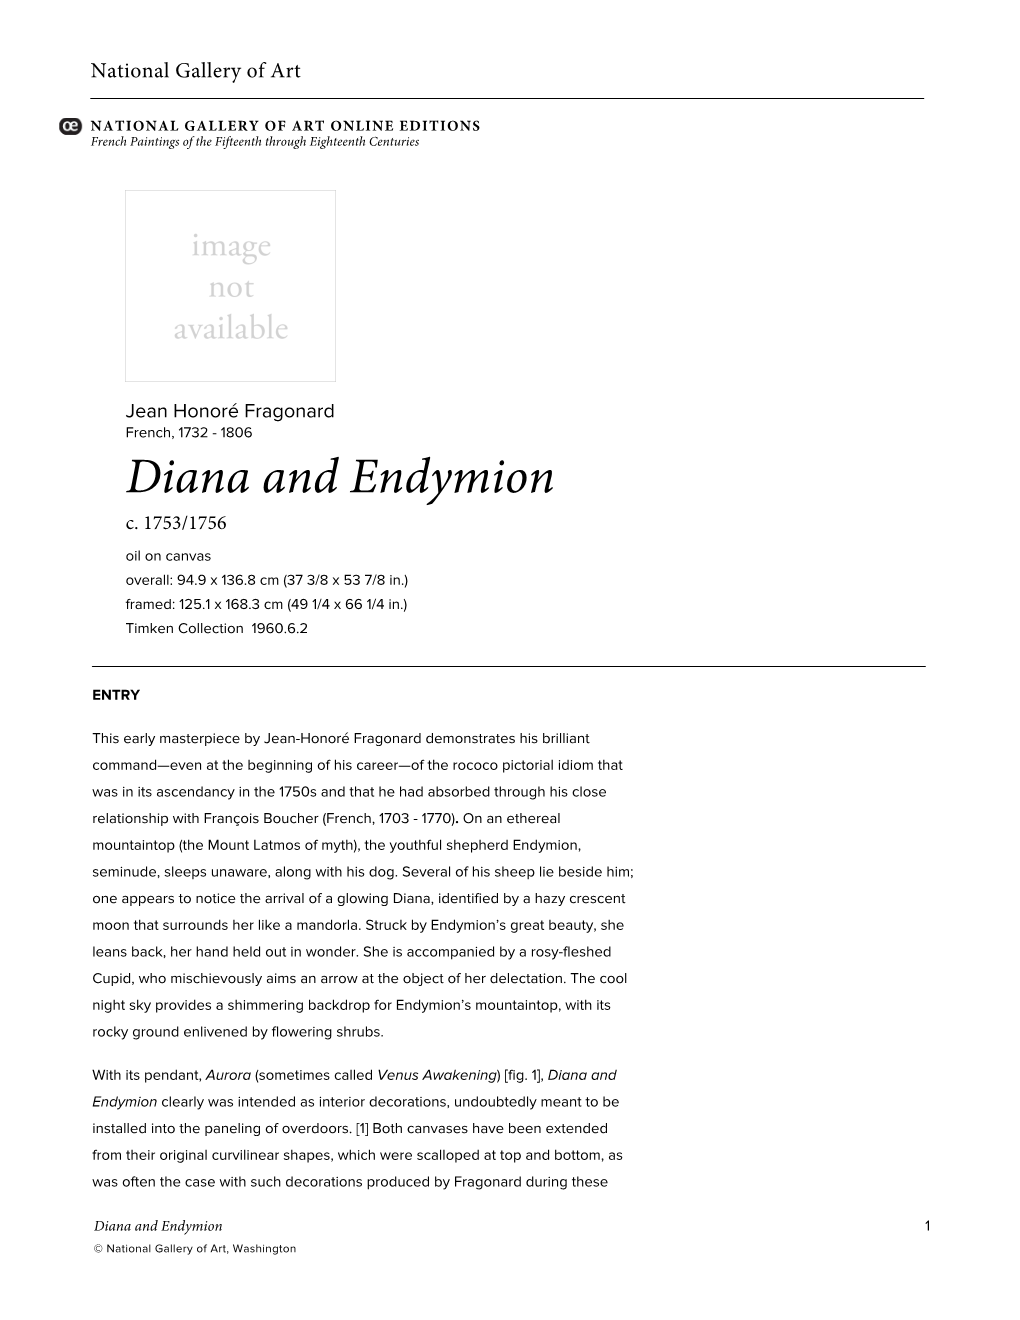 Diana and Endymion C